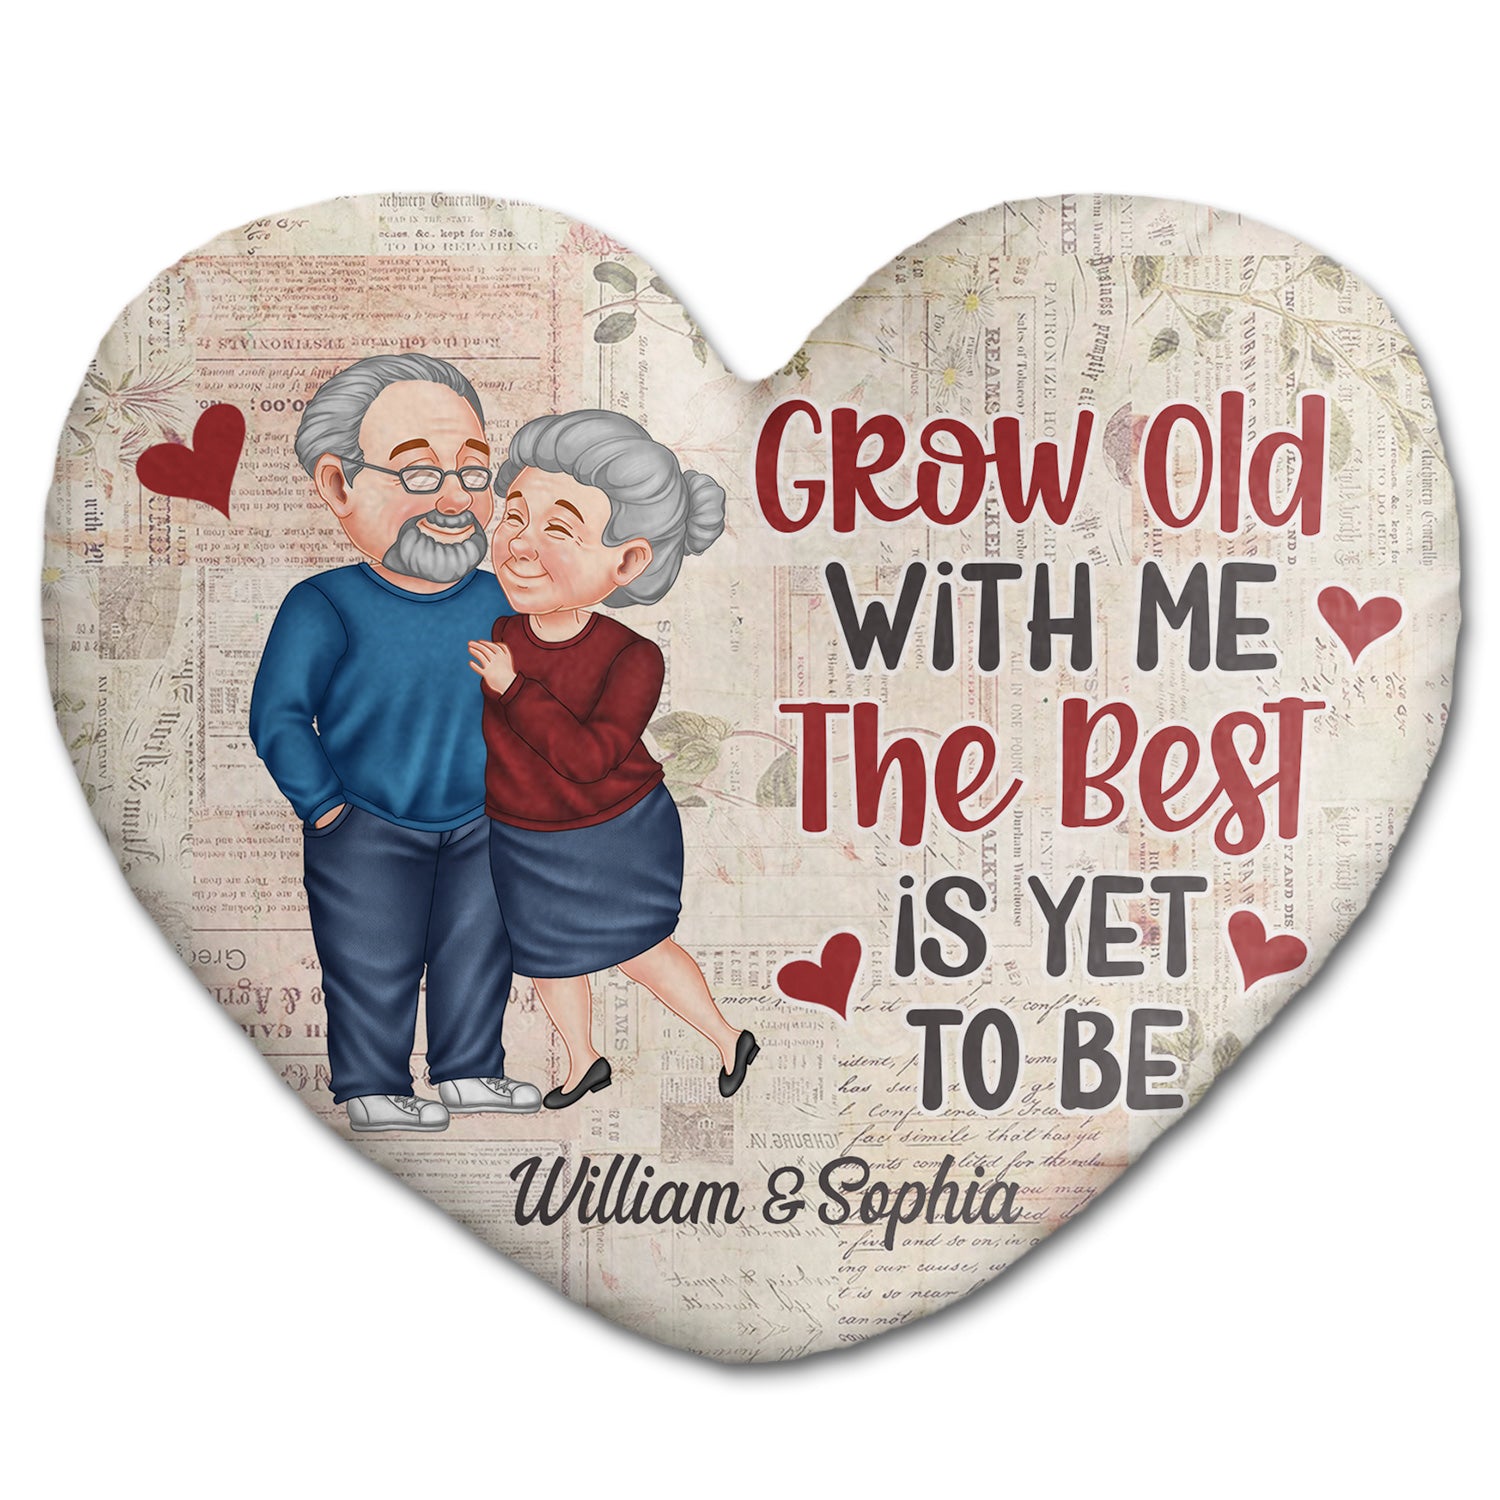 Grow Old With Me Arm In Arm - Loving, Anniversary Gift For Couples, Husband, Wife - Personalized Heart Shaped Pillow